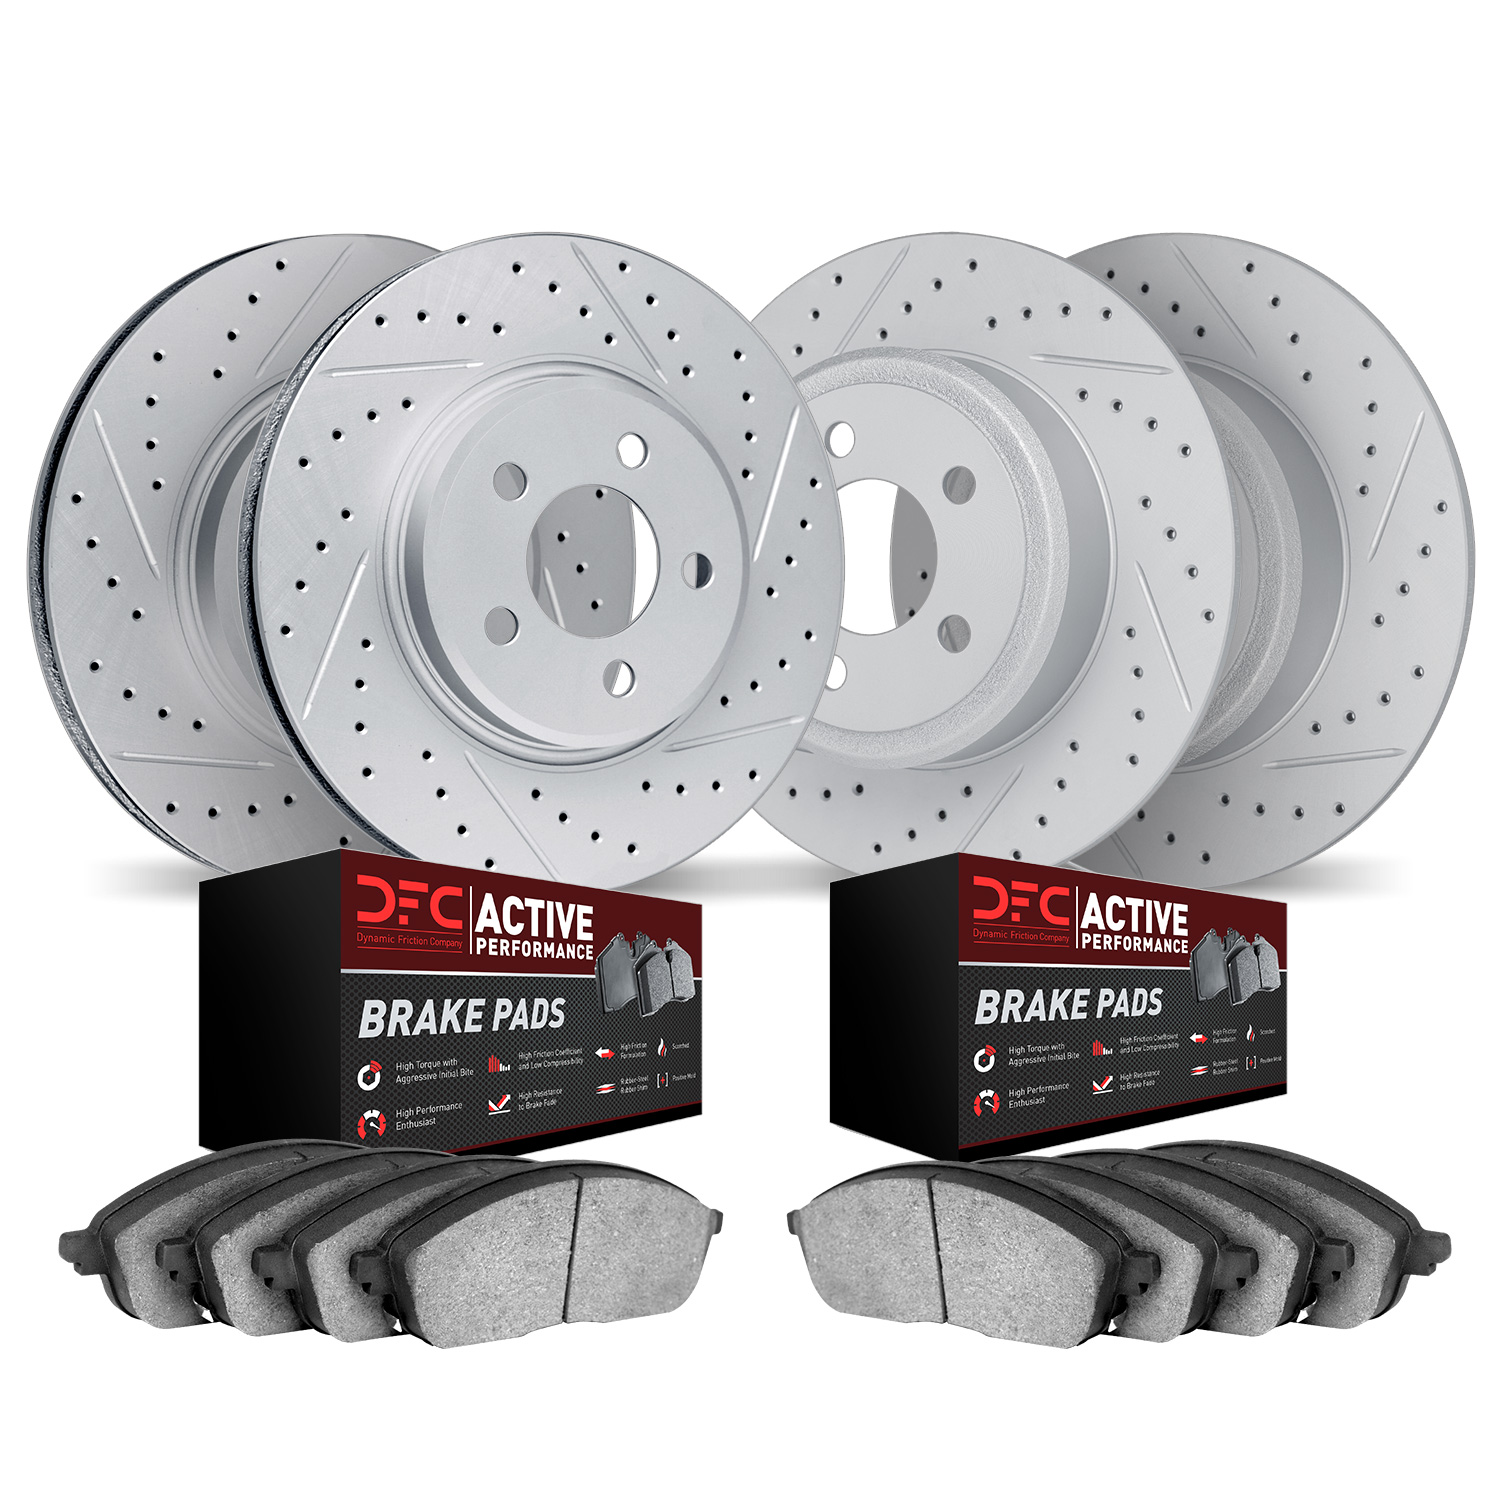 2704-73012 Geoperformance Drilled/Slotted Brake Rotors with Active Performance Pads Kit, 2008-2015 Audi/Volkswagen, Position: Fr